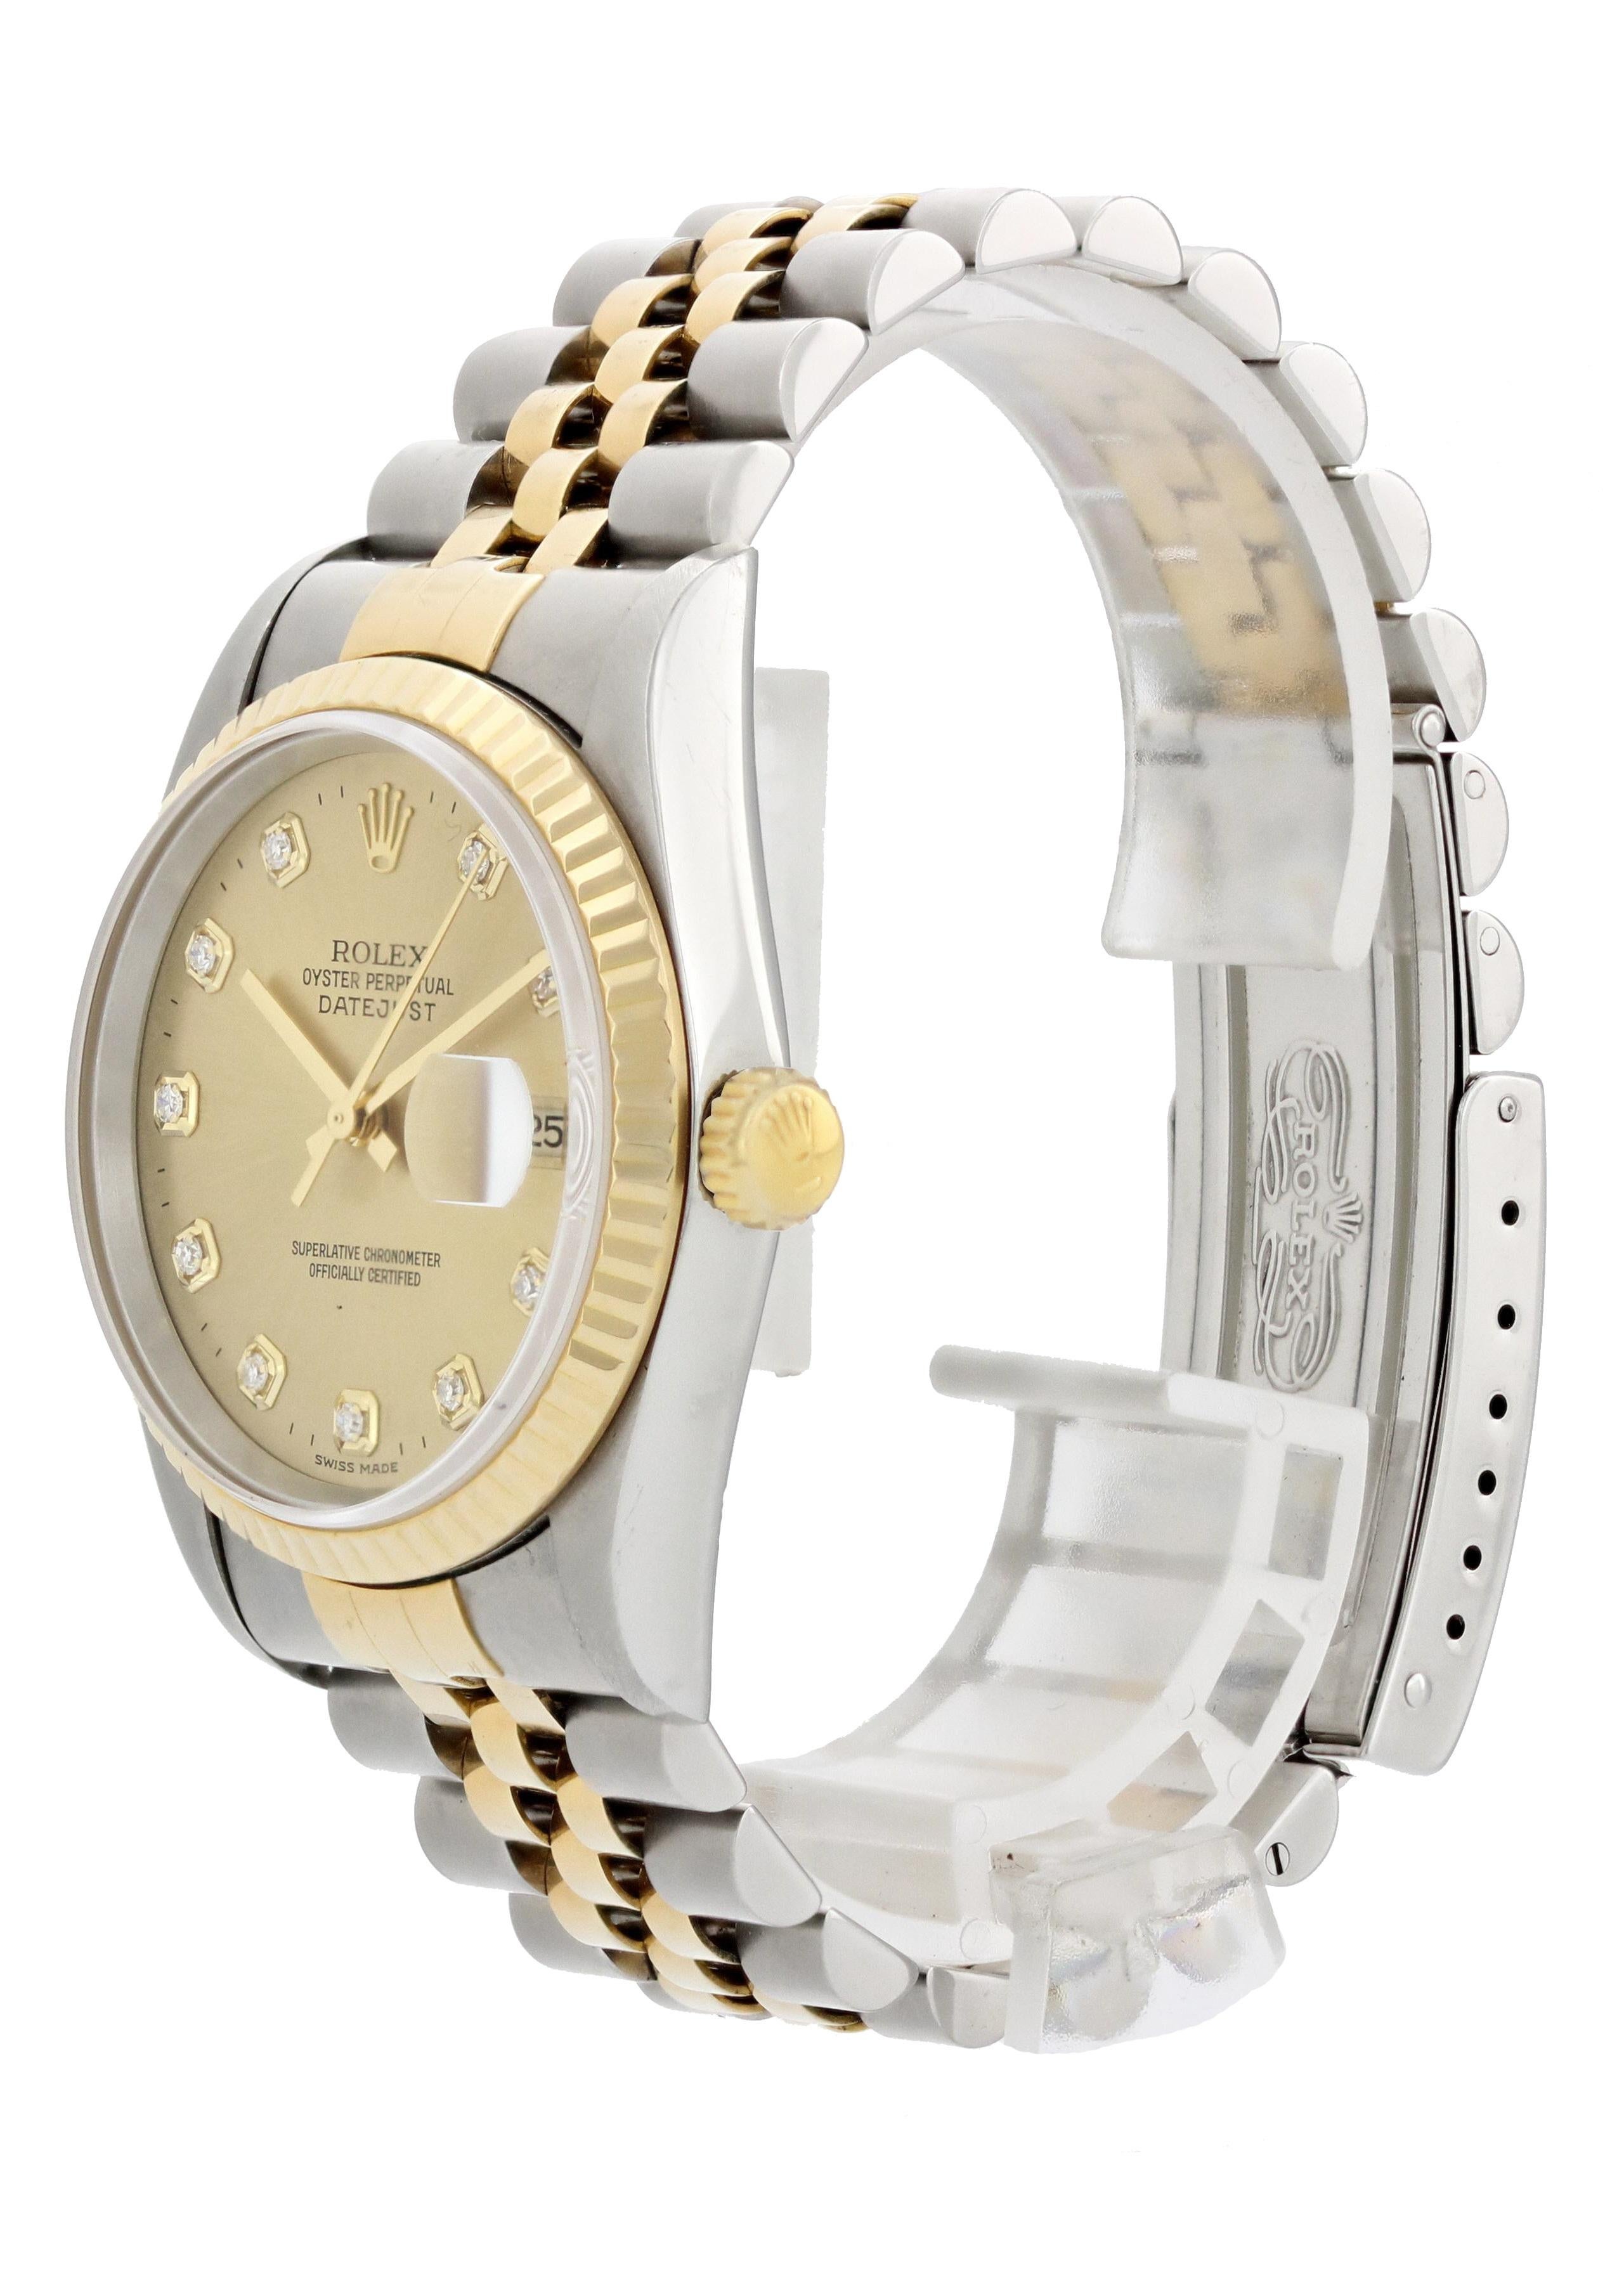 Rolex Datejust Professional 16233 Men Watch. 
36mm Stainless Steel case. 
Yellow Gold Stationary bezel. 
Champagne dial with gold hands and factory set diamond hour markers. 
Minute markers on the outer dial. 
Date display at the 3 o'clock position.